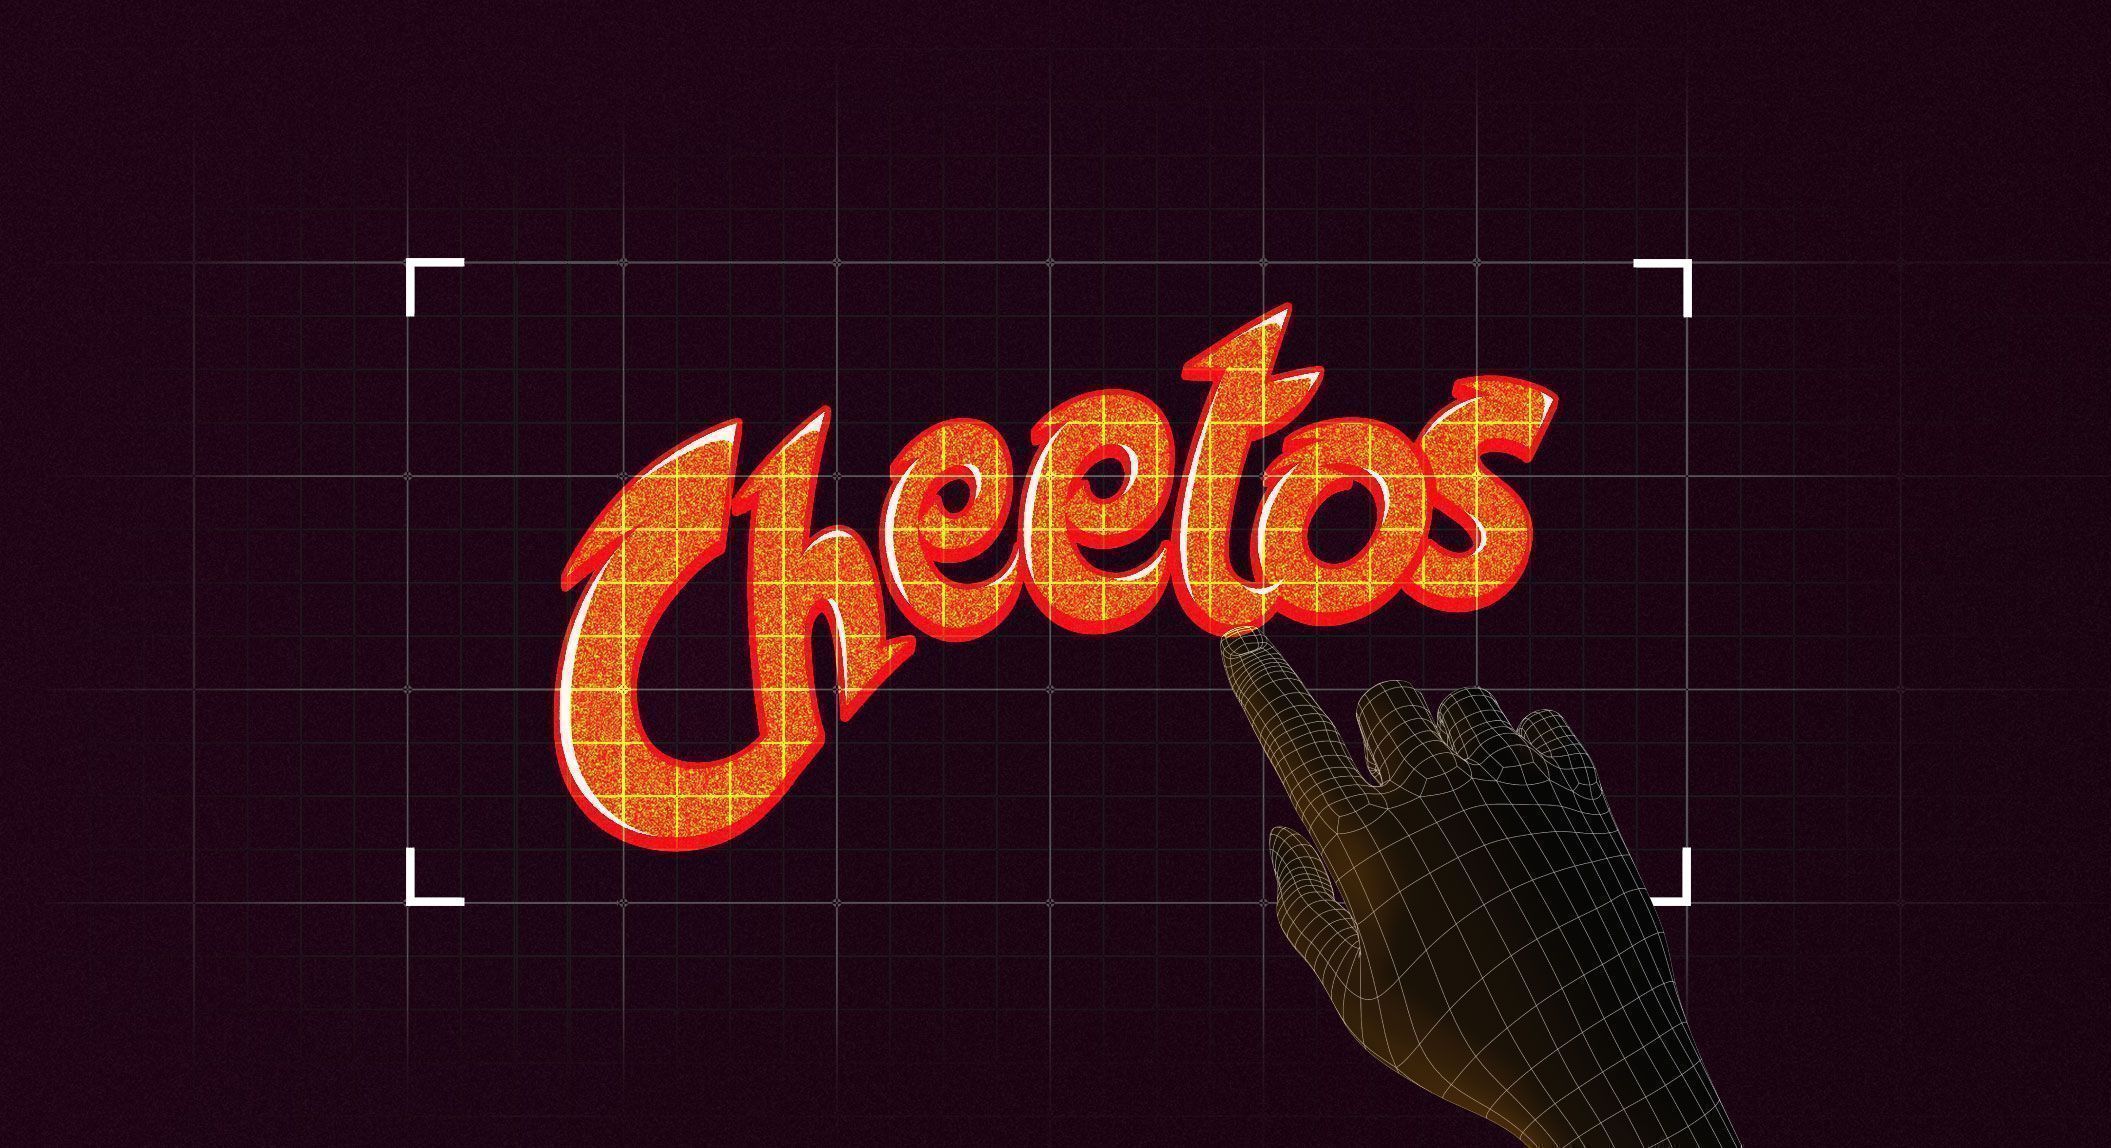 A hand with a grid over it is touching the Cheetos logo. - Cheetos